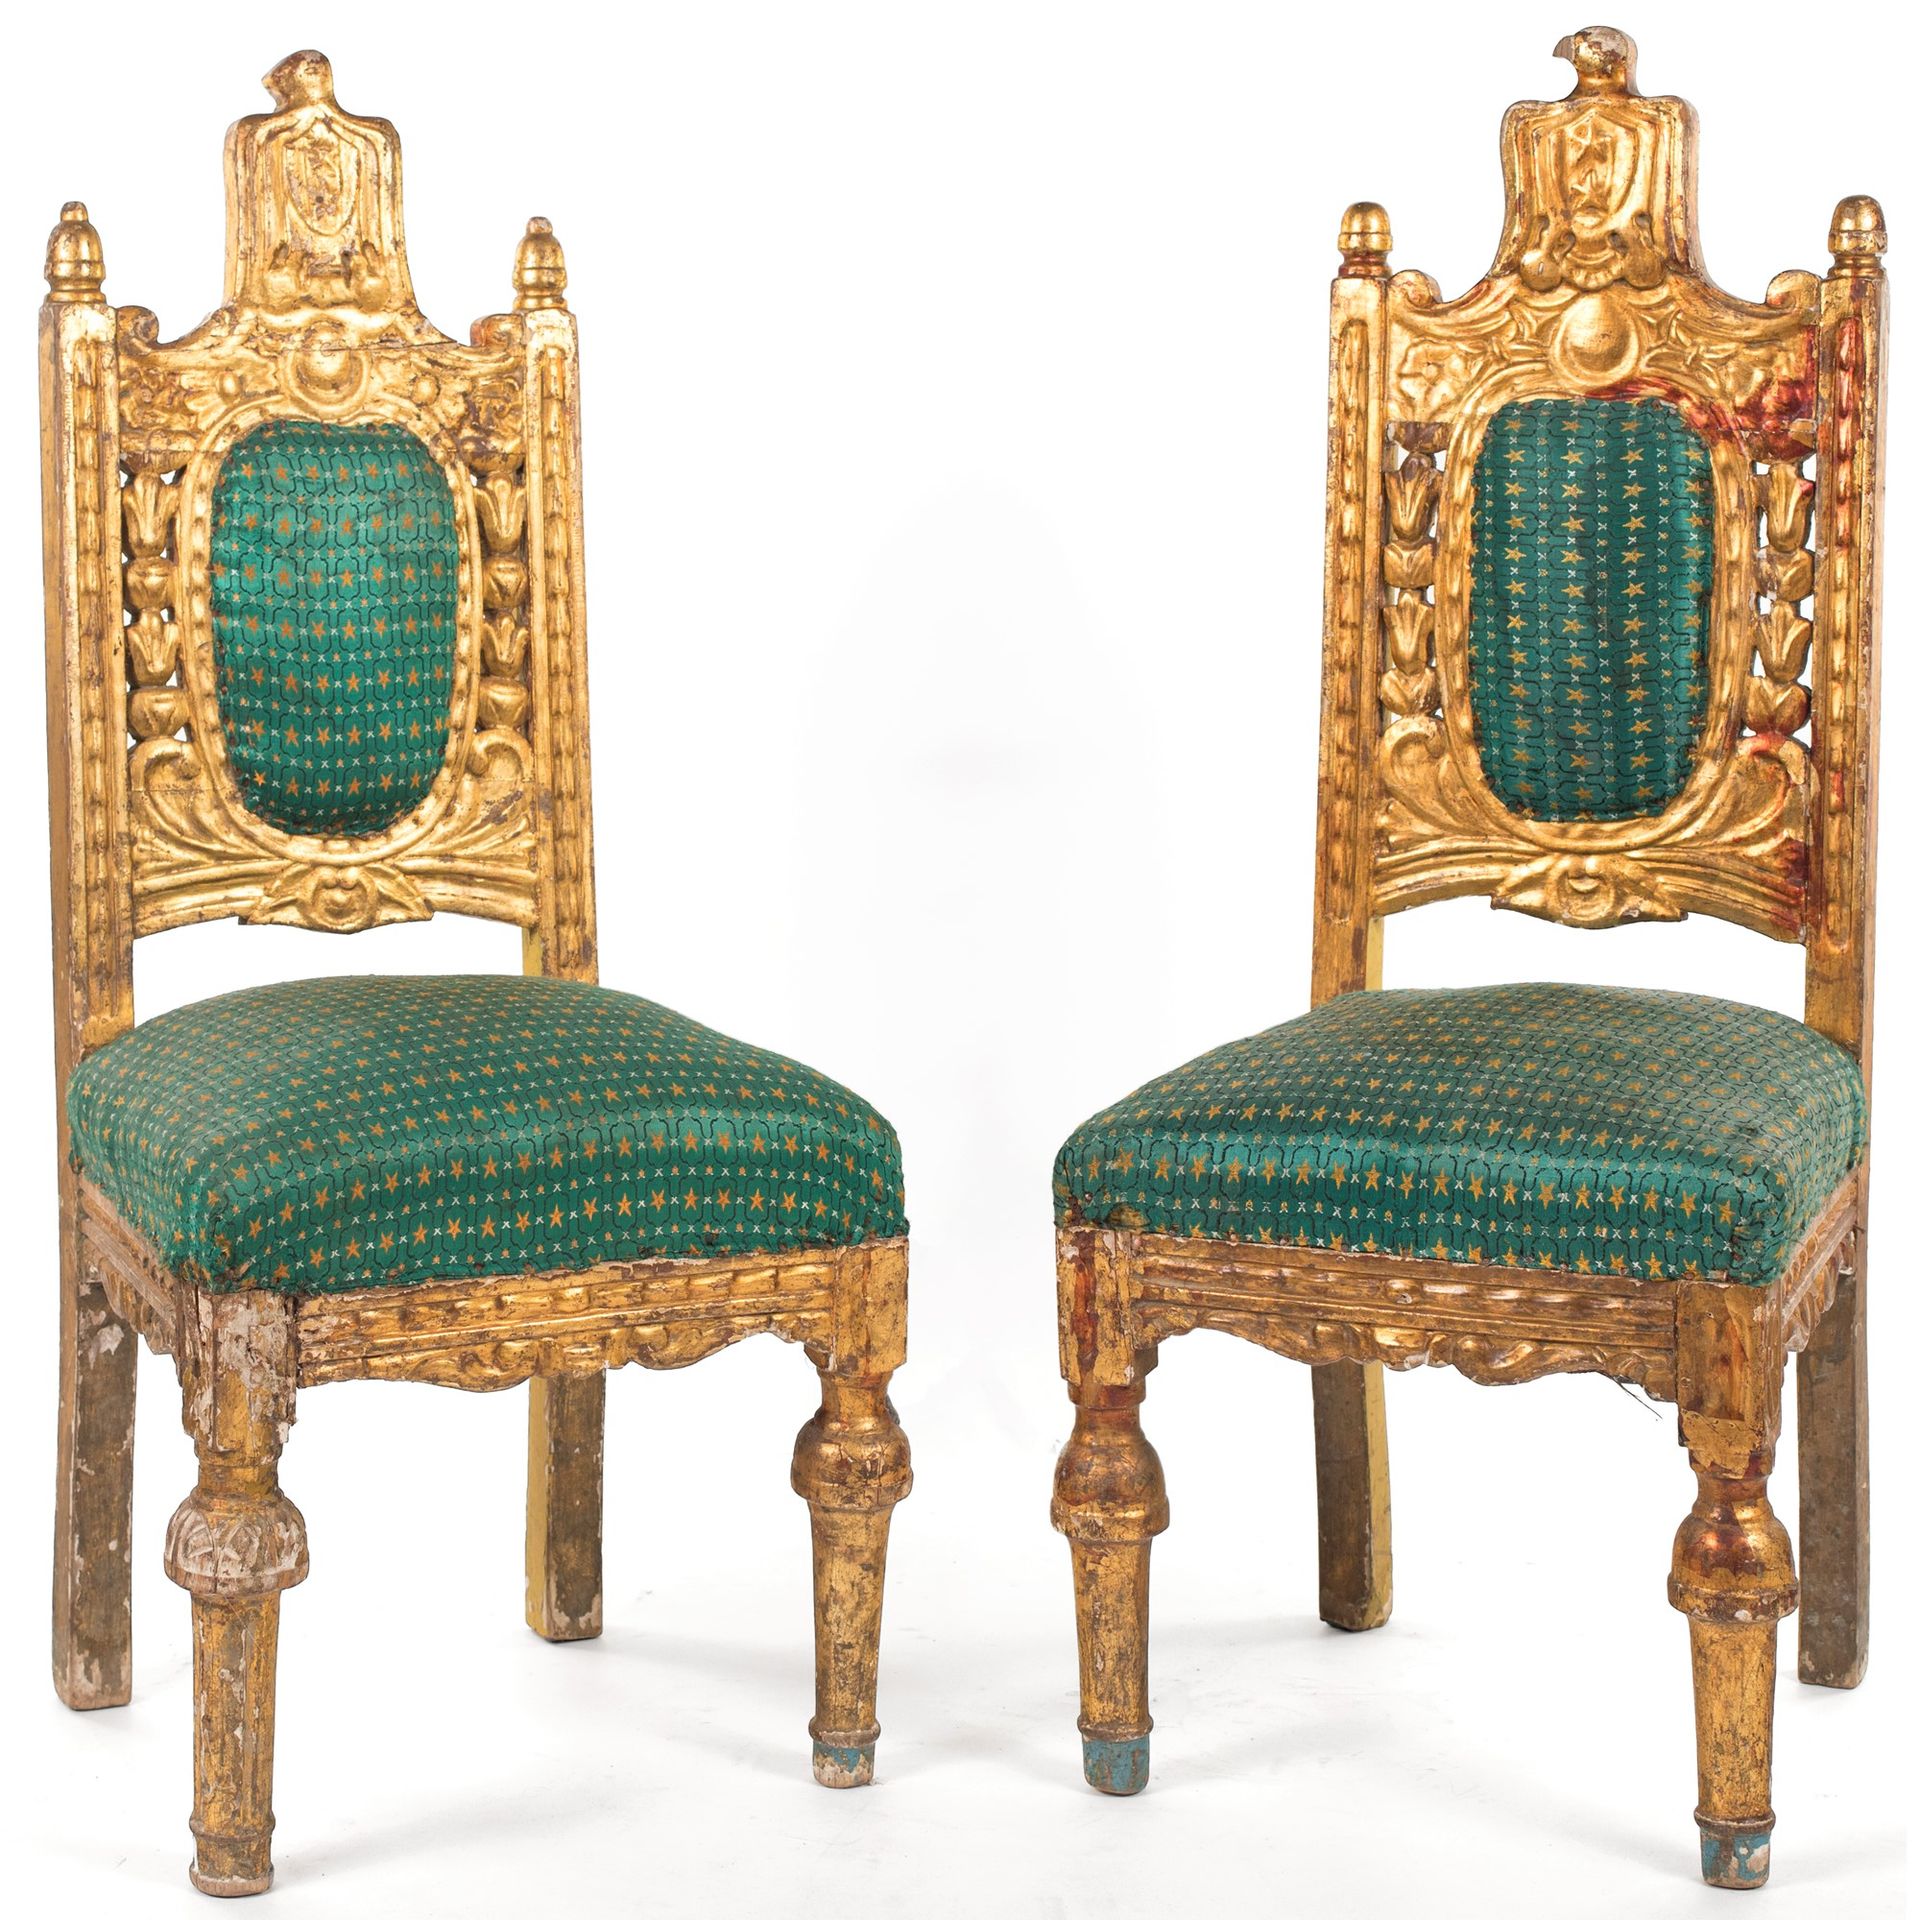 Pair of chairs in gilded wood with high backs and padded seats, square legs